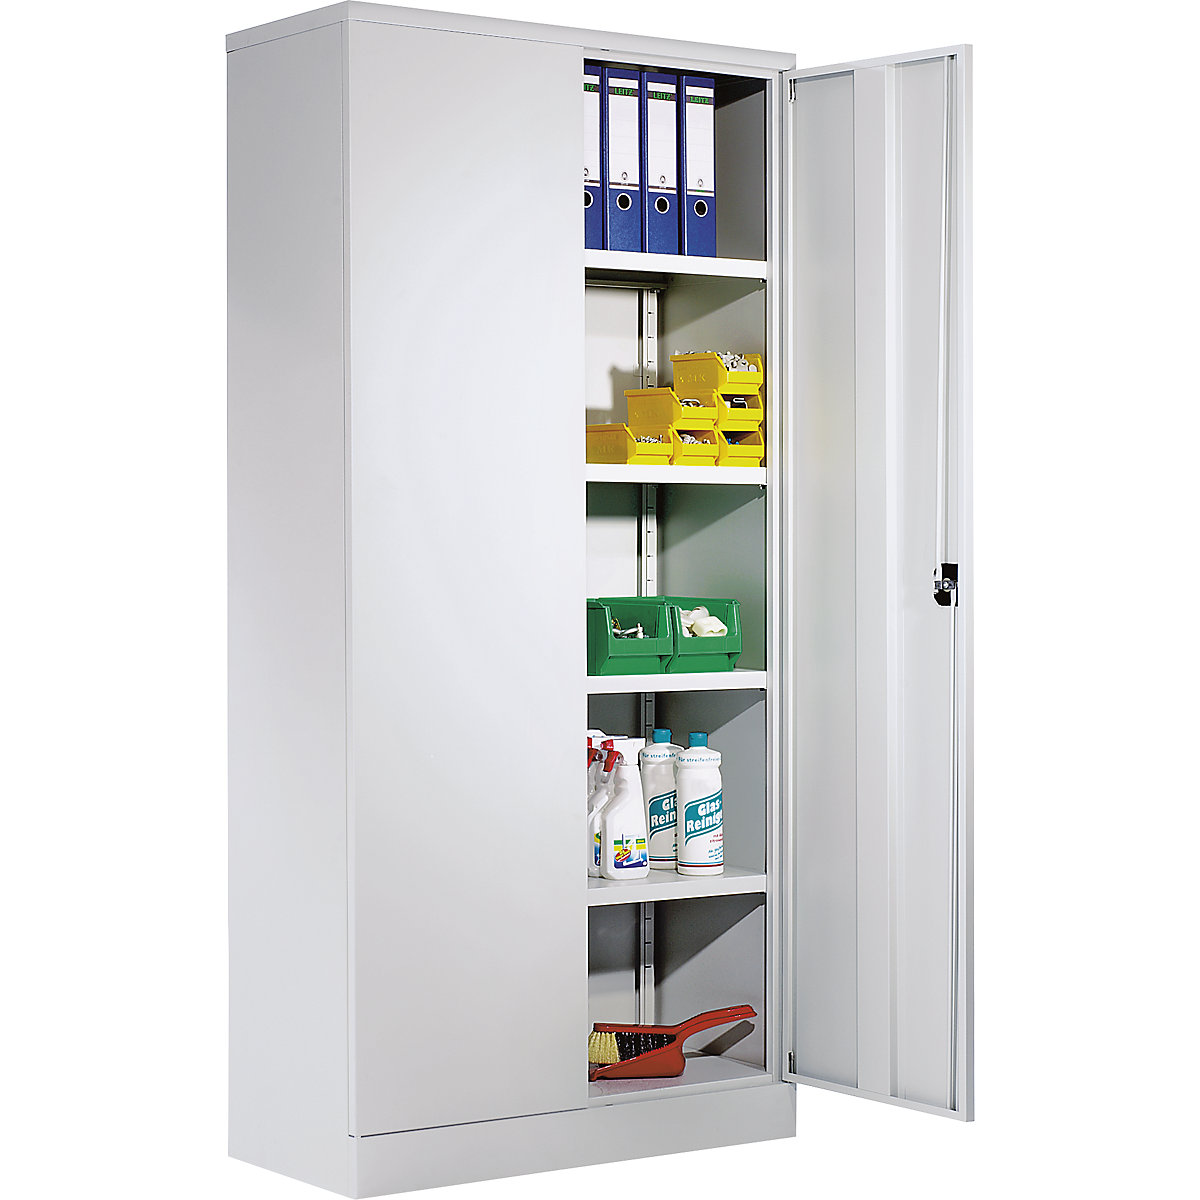 Universal cupboard with hinged doors and 4 shelves – eurokraft basic, HxWxD 1950 x 915 x 421 mm, body and doors light grey, 3+ items-8